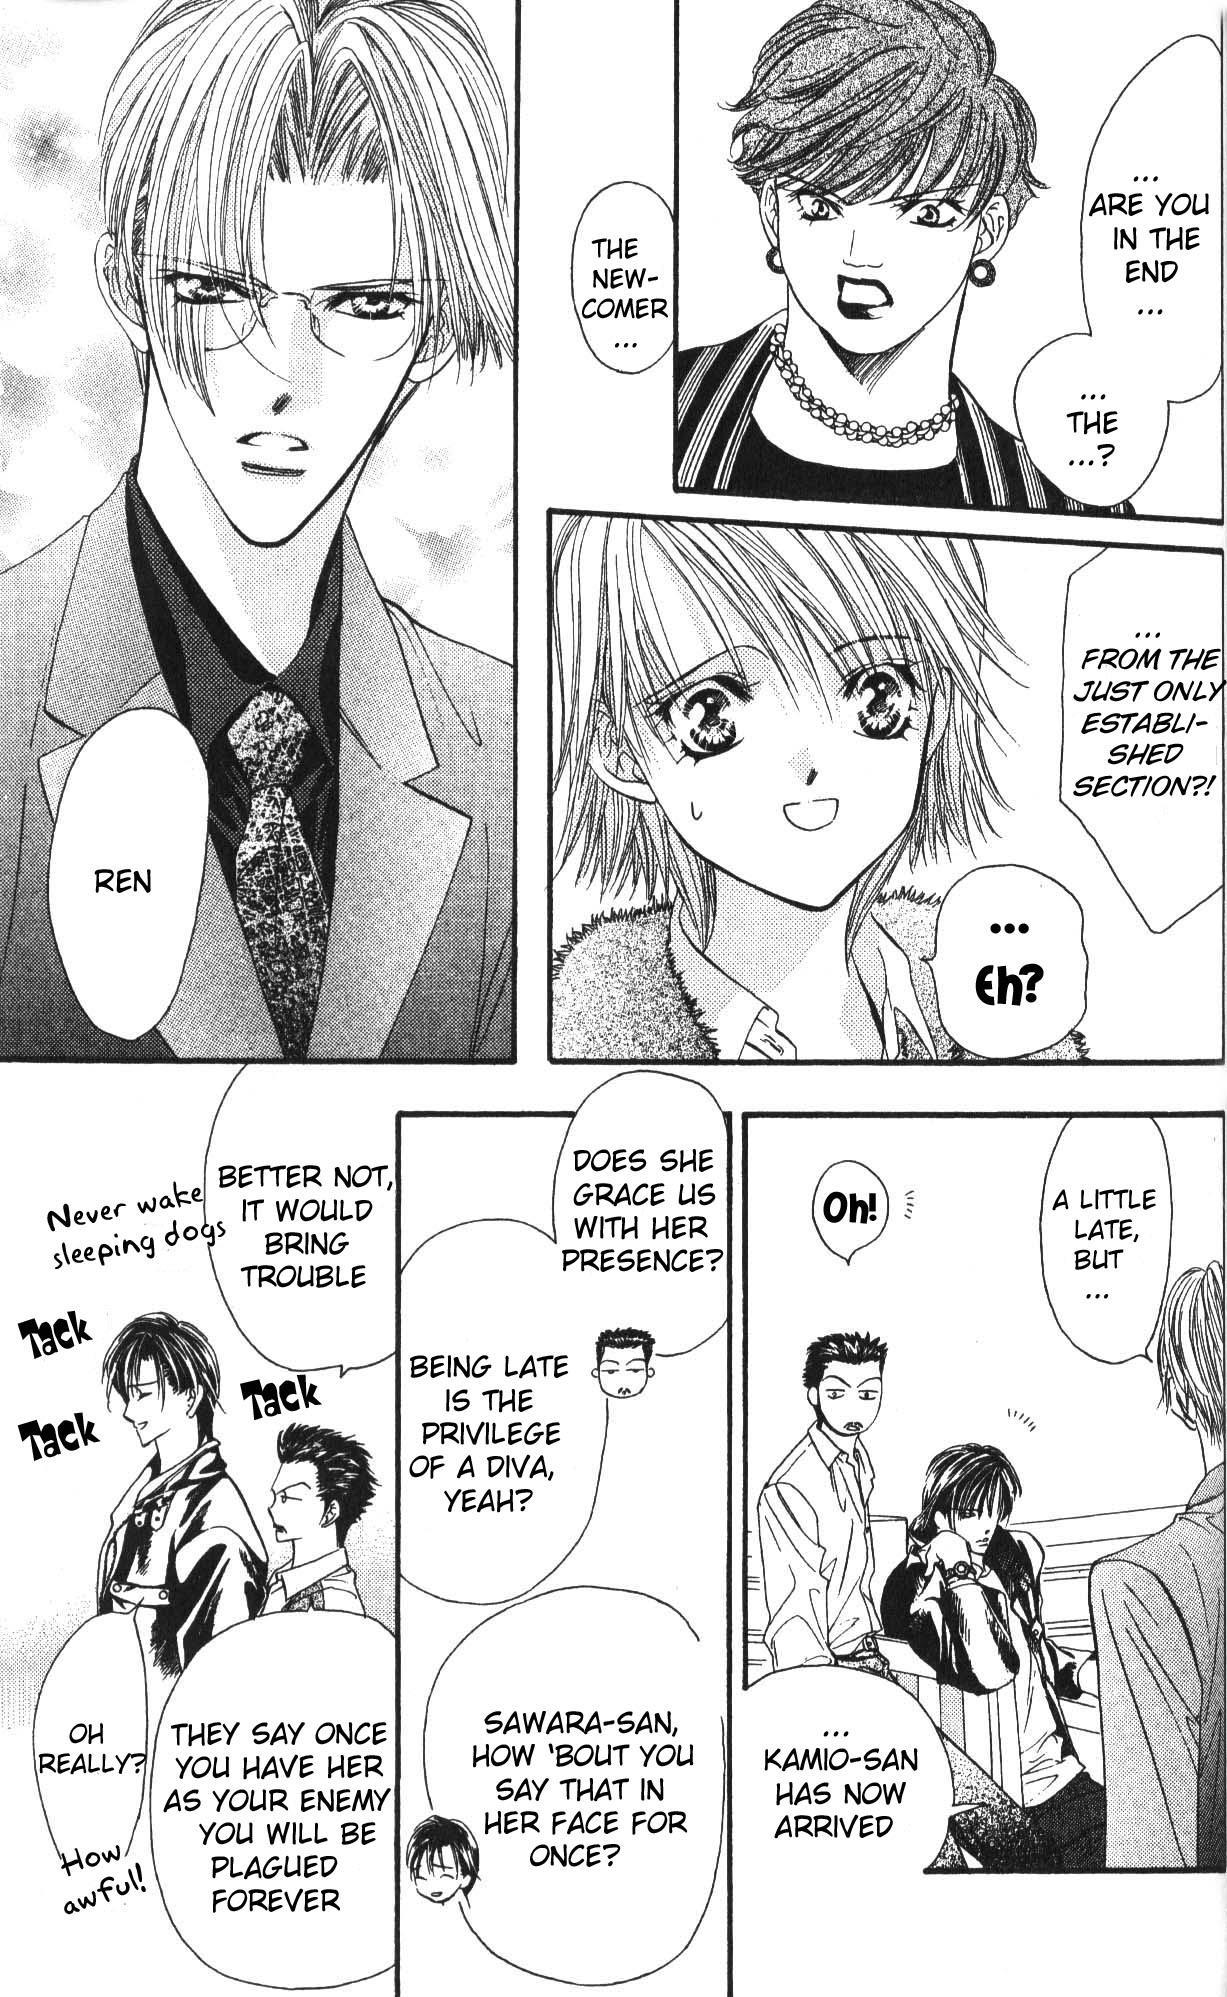 Skip Beat!, Chapter 7 That Name is Taboo image 15